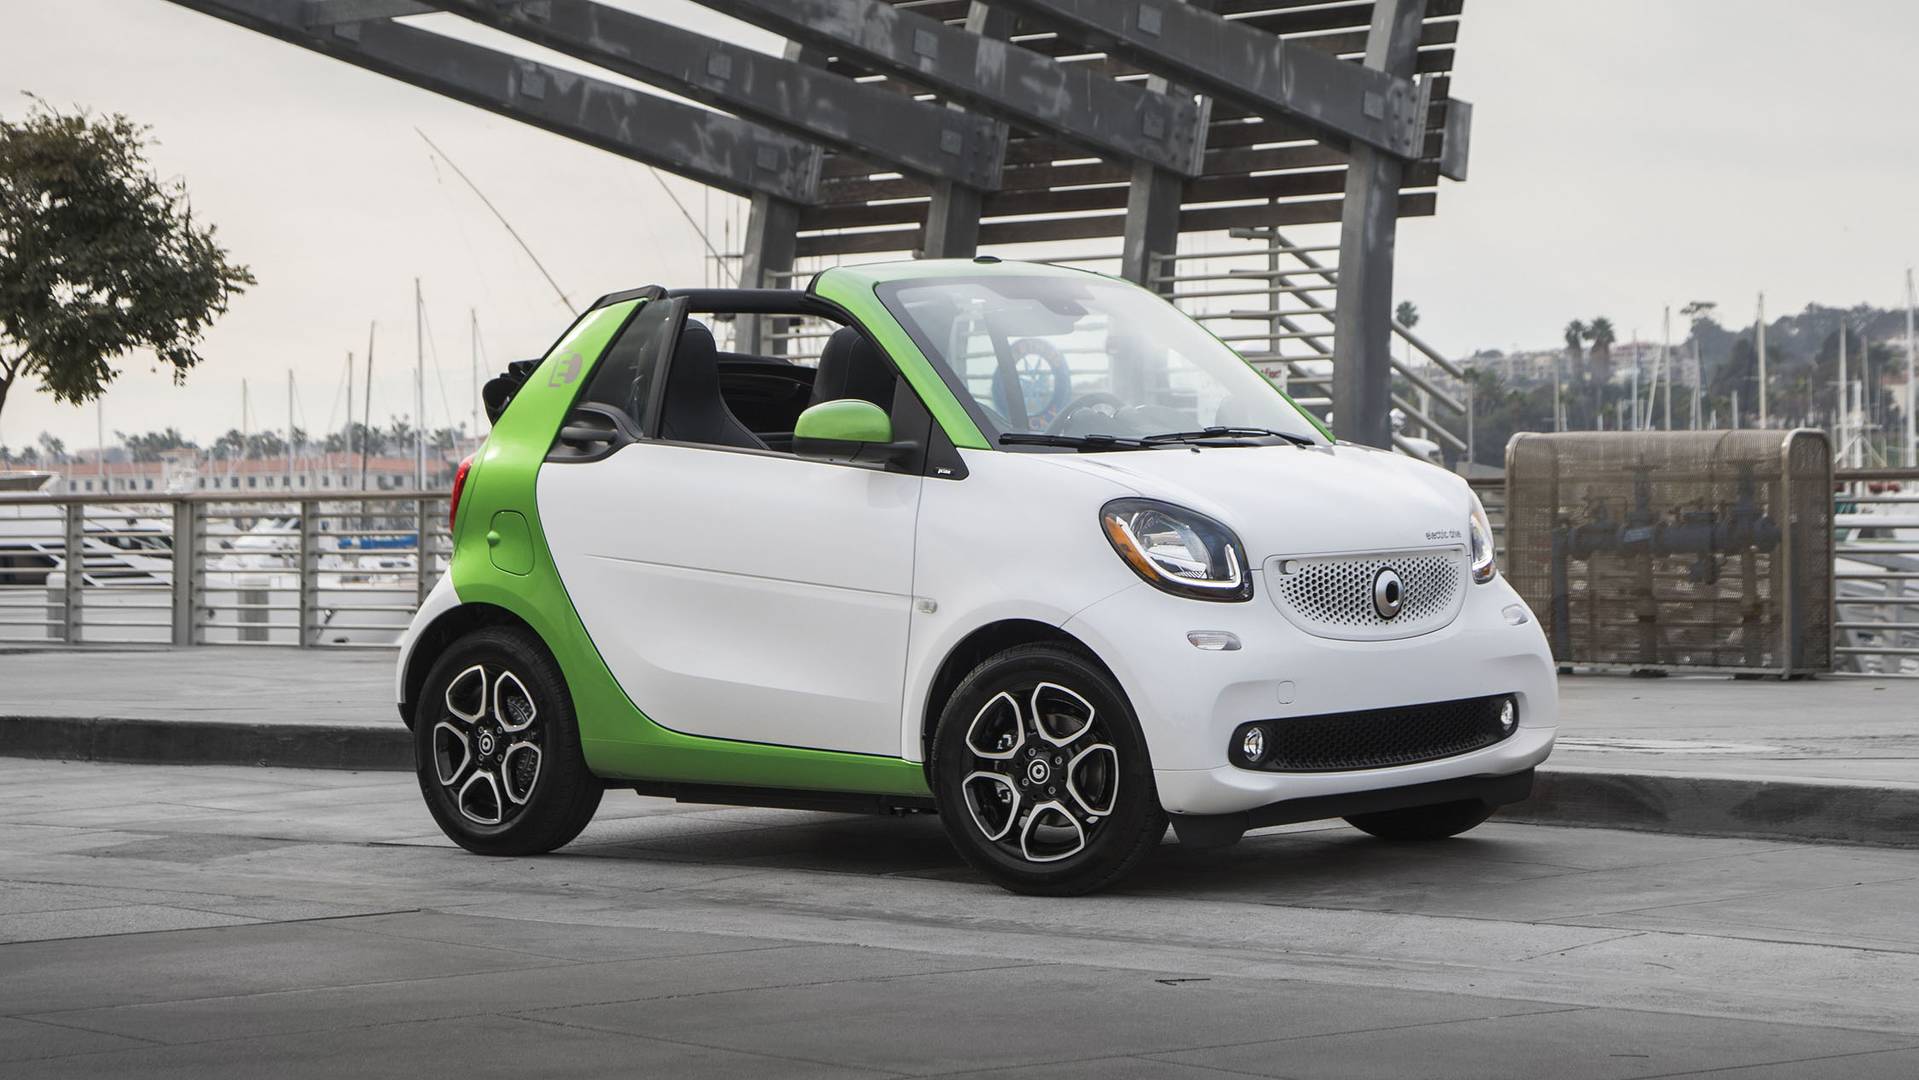 2018 Smart ForTwo Electric Drive Cabriolet Review: Fun Without Function